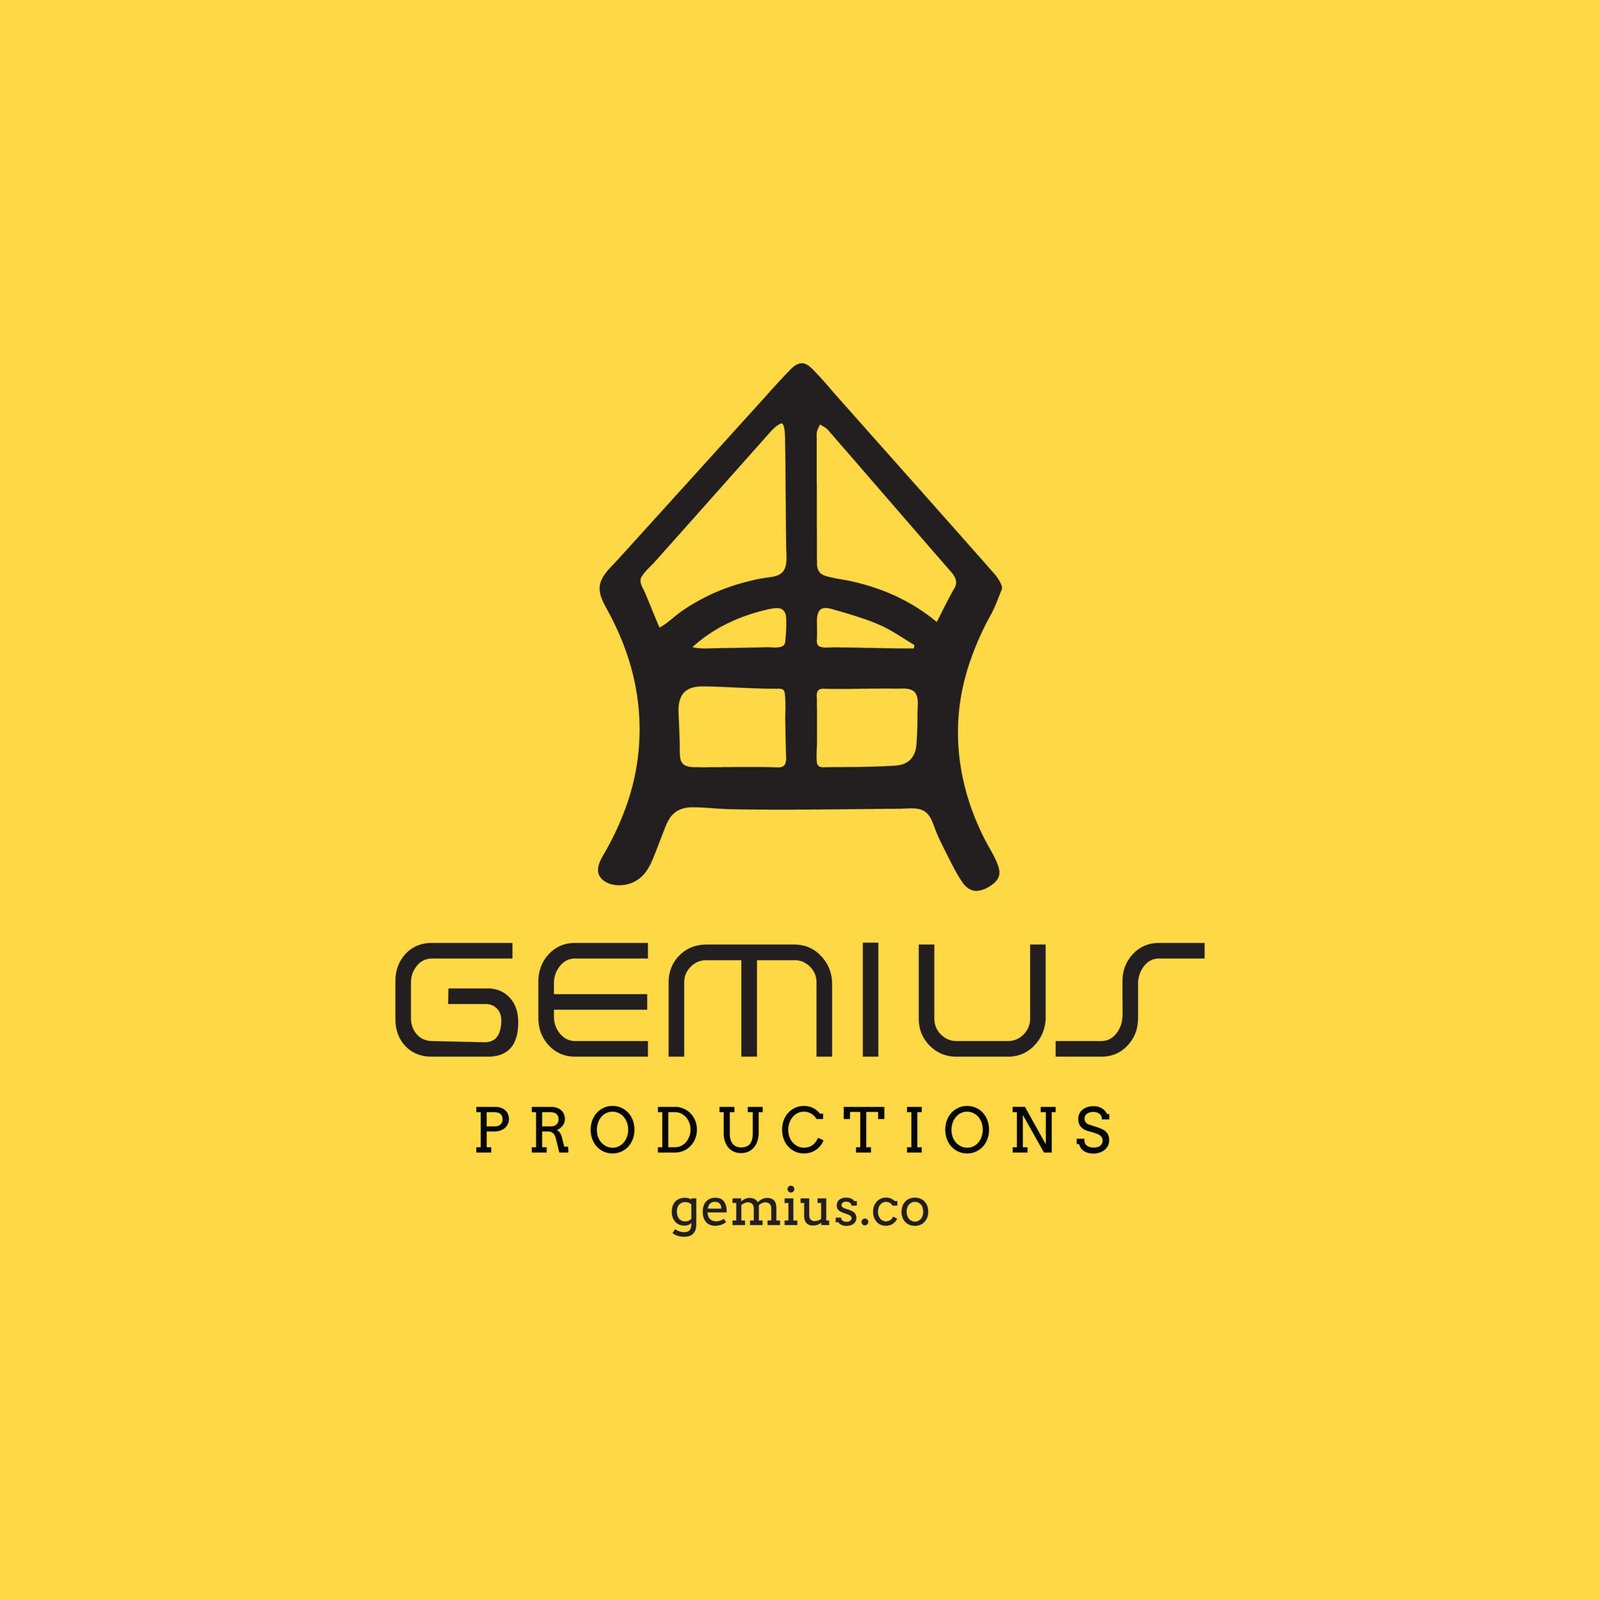 Taking their 7 years of prowess forward, Surat-based marketing and advertising agency, Gemius Design Studio, is set to embark on a journey with Gemius Productions - a full-fledged production house. With their continued art of assimilating people, ideas and stories, Gemius has time and again envisioned various brands’ dreams and sculpted them into reality. Since its inception, Co-founders Anushree Pacheriwal and Saurabh Pacheriwal have ardently believed that storytelling is one of the most powerful ways to breathe life into a brand, making it a vital component of marketing. “Being hit by a pandemic has changed the diaspora of marketing across the world. The only differentiating factor that now remains is the approach with which we present our content to hit the right chord of our target audience. This is precisely what we intend to do with Gemius Productions. Storytelling in 2021 is a tricky craft, but when done rightly it is what makes all the difference.” said Anushree Pacheriwal. Being involved in the back-end production processes nationally and internationally while creating brand films, fashion shows, documentaries, even corporate films, Gemius has established a compelling hold over their storytelling through motion pictures along with their brand-building consultation. Their tenacity has also been seen through their product shoots with respect to fashion, lifestyle, food and other arenas. Over the years, they’ve worked with brands such as World Economic Forum, Raisin Global, Alpino Health Foods and people like Bhumi Pednekar, Parineeti Chopra, Prince Narula amongst many others that glorify their portfolio. “To appeal to a larger audience, work extensively with talent and crew and to tell stories that people love, it was important to create a separate production house and develop a team dedicated solely towards it.”, said Nikhil Hada, Production Head, Gemius Productions. With the right balance of emotional, quirky and inspiring content, Gemius Design Studio shifted the paradigm of marketing in Surat 7 years ago, and is now determined to do the same with Gemius Productions.